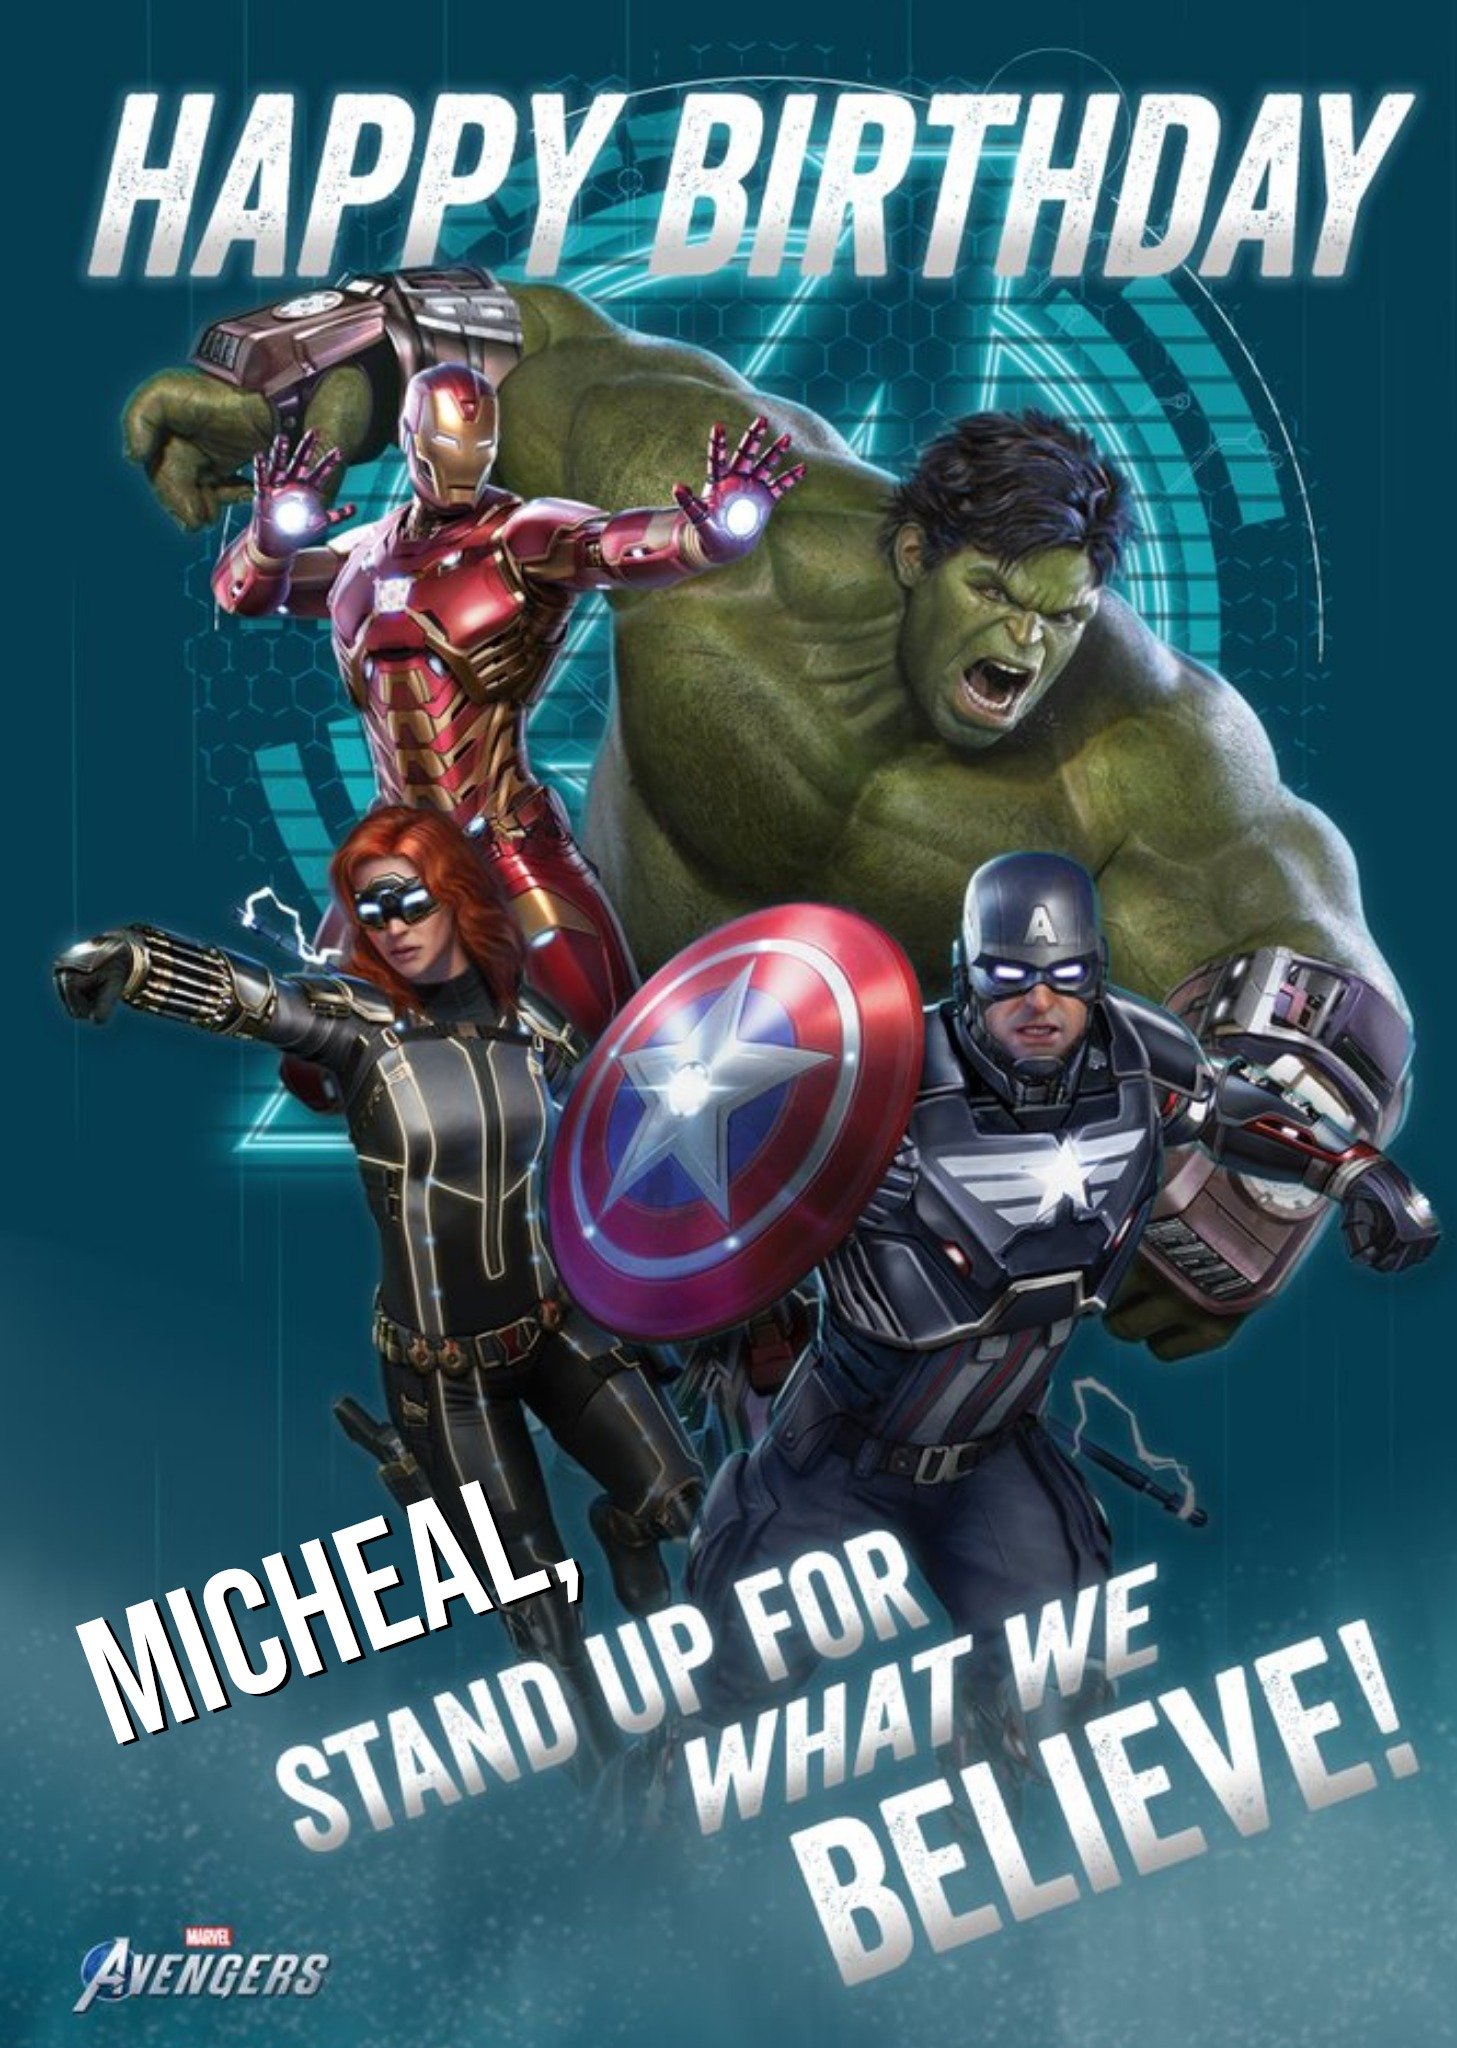 Disney Avengers Gamerverse Stand Up For What We Believe Birthday Card Ecard